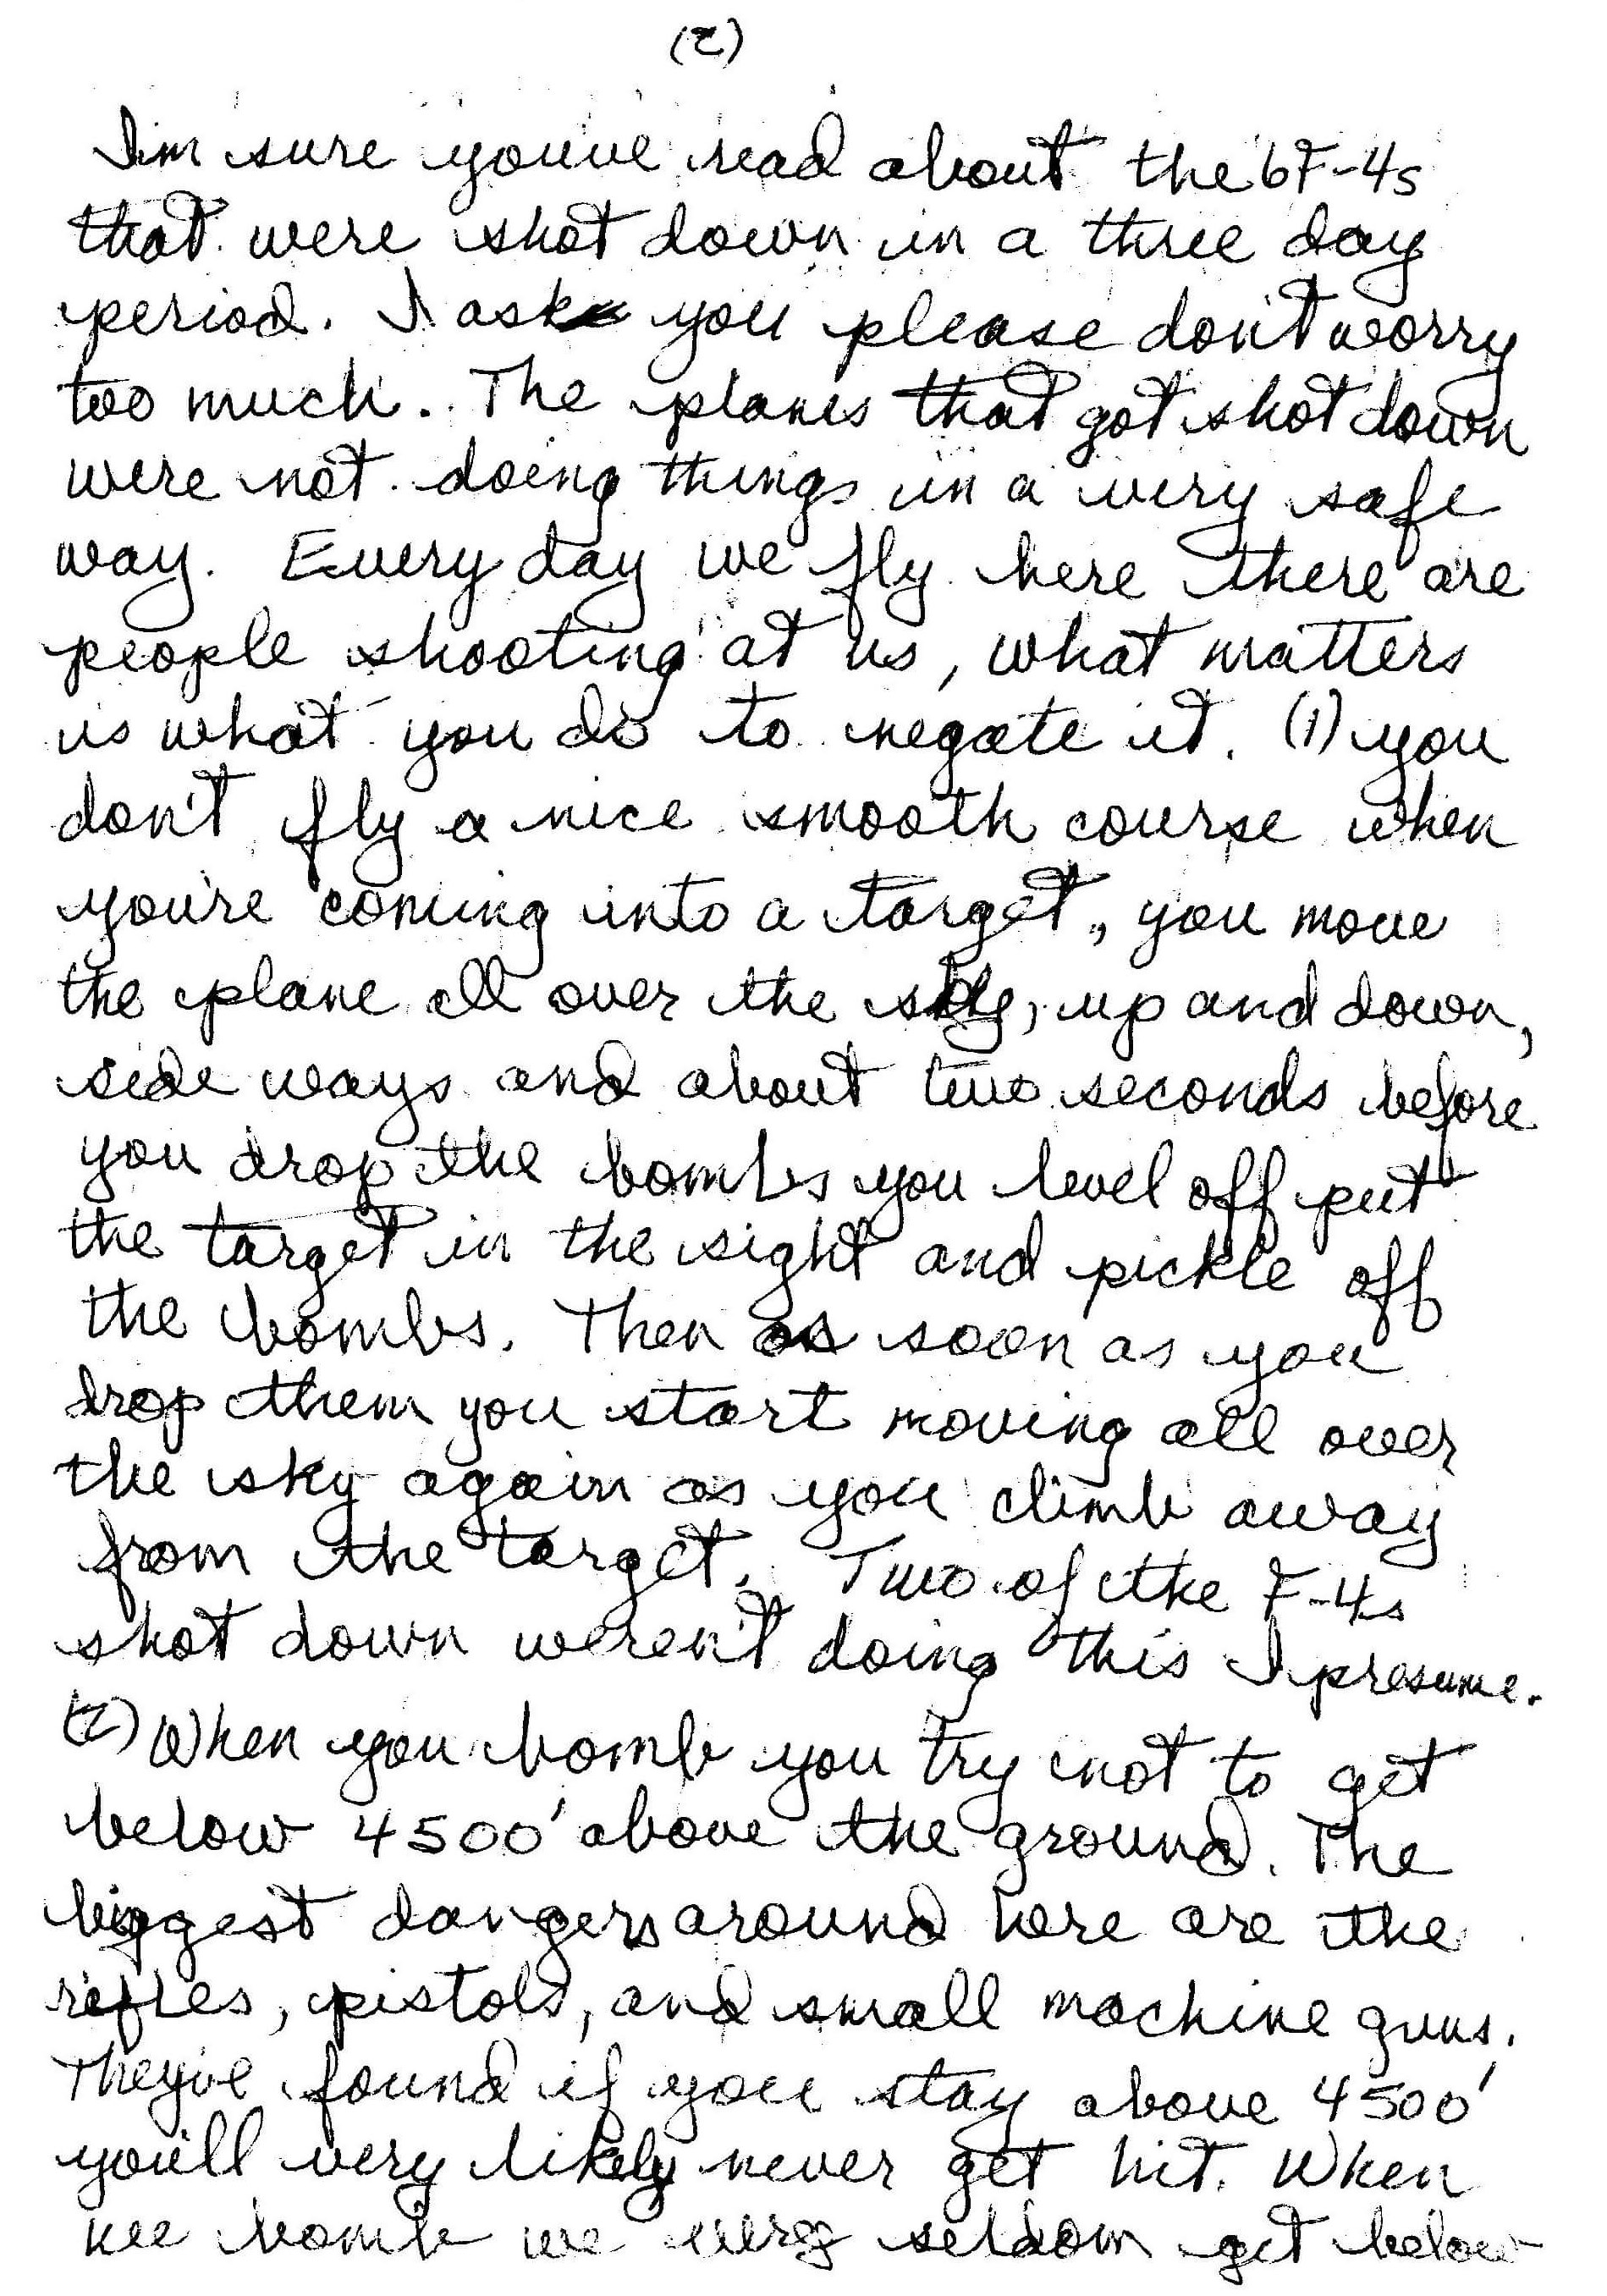 Page 2 of a letter home.